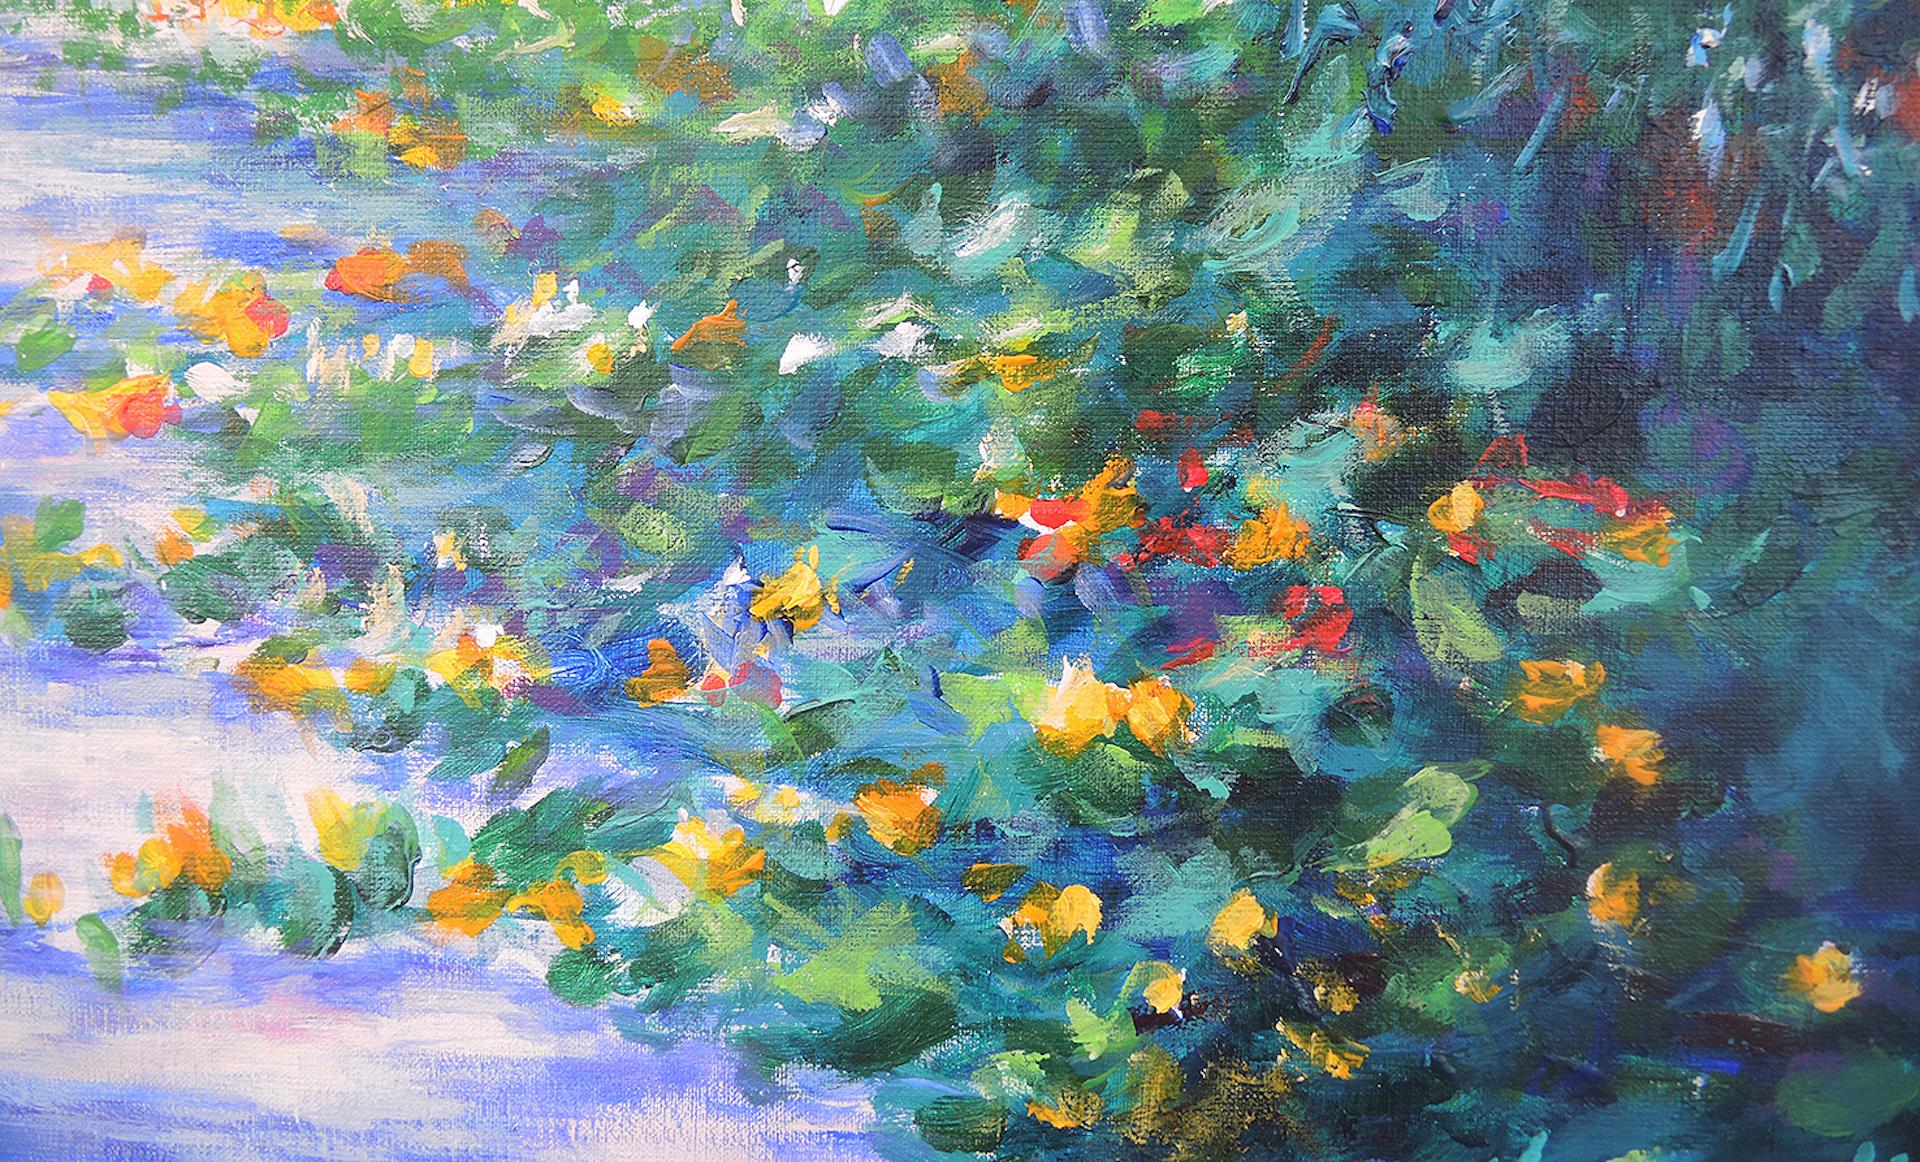 Mary Chaplin
Along the nasturtium path in Monet’s gardens in Giverny
Original Impressionist Still Life Painting
Acrylic Paint on Canvas
Canvas Size: H 81cm x W 100cm x D 2cm
Sold Unframed
Ready to Hang
(Please note that in situ images are purely an